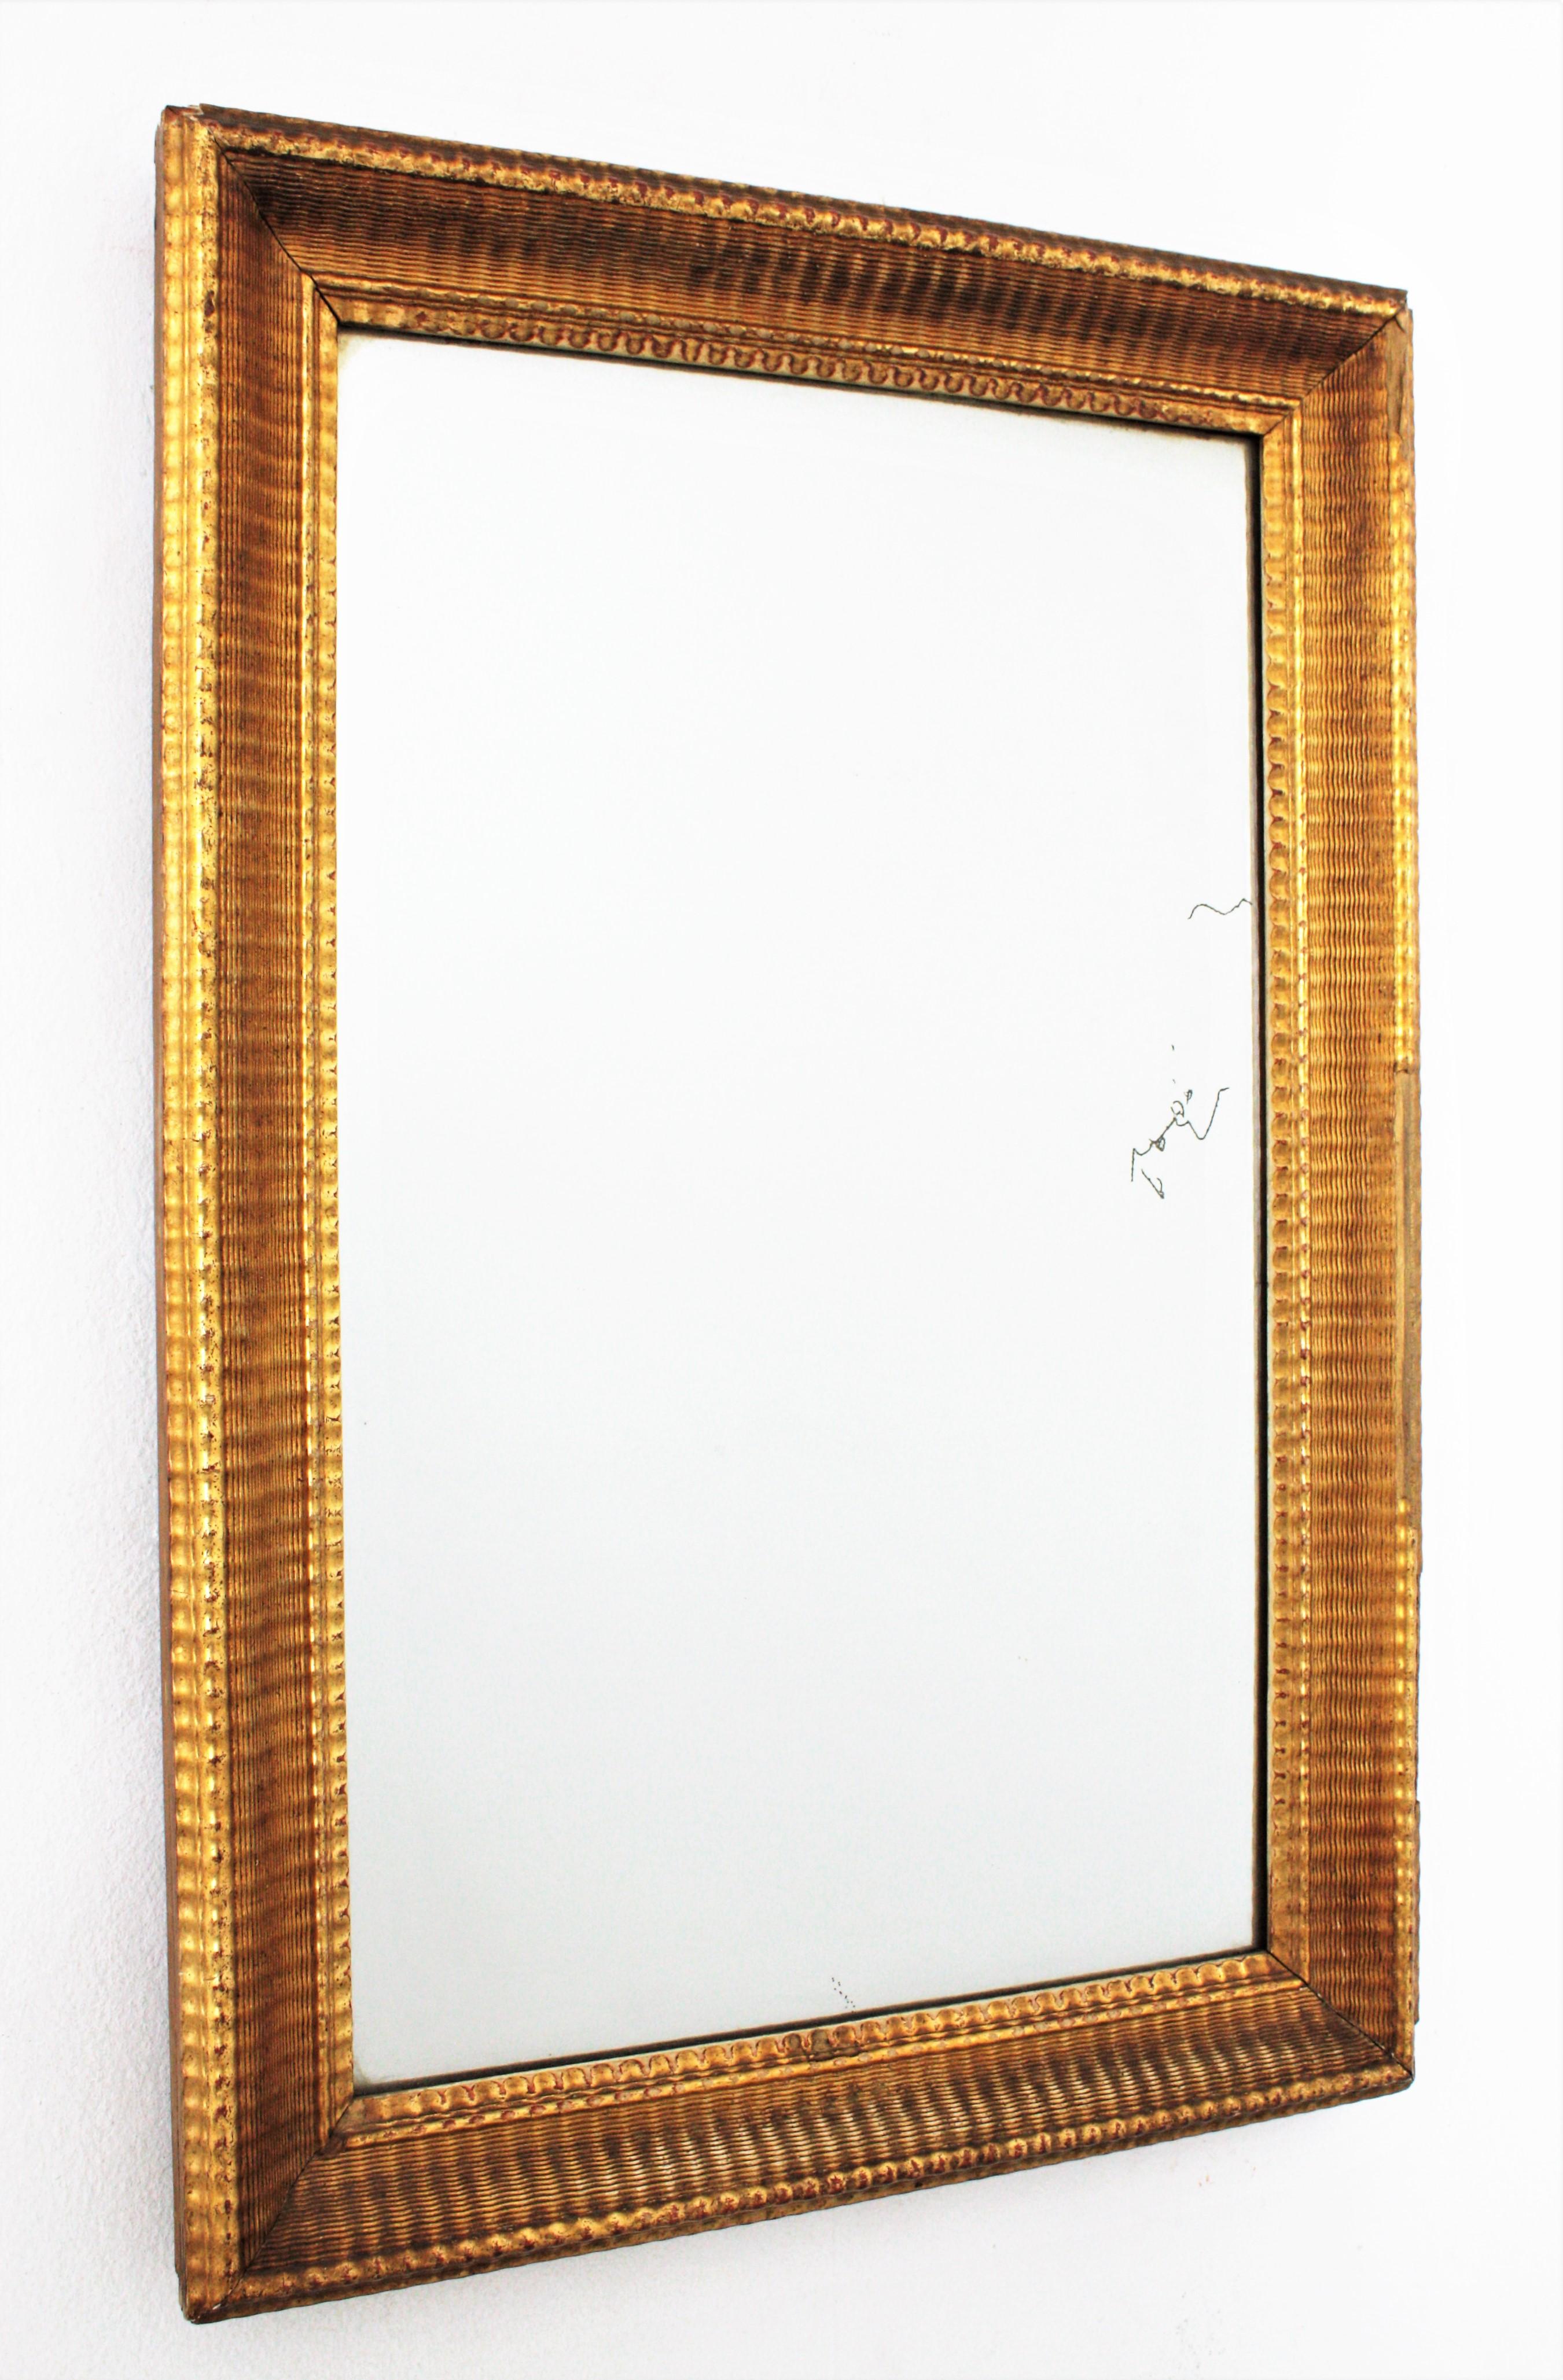 Amazing Louis Philippe period mirror with a finely ribbed carving frame and gold leaf finish. France circa 1860.
Elegant, strong and soung, this mirror has a gorgeous original aged patina. It has some losses on the frame, but they don't rest